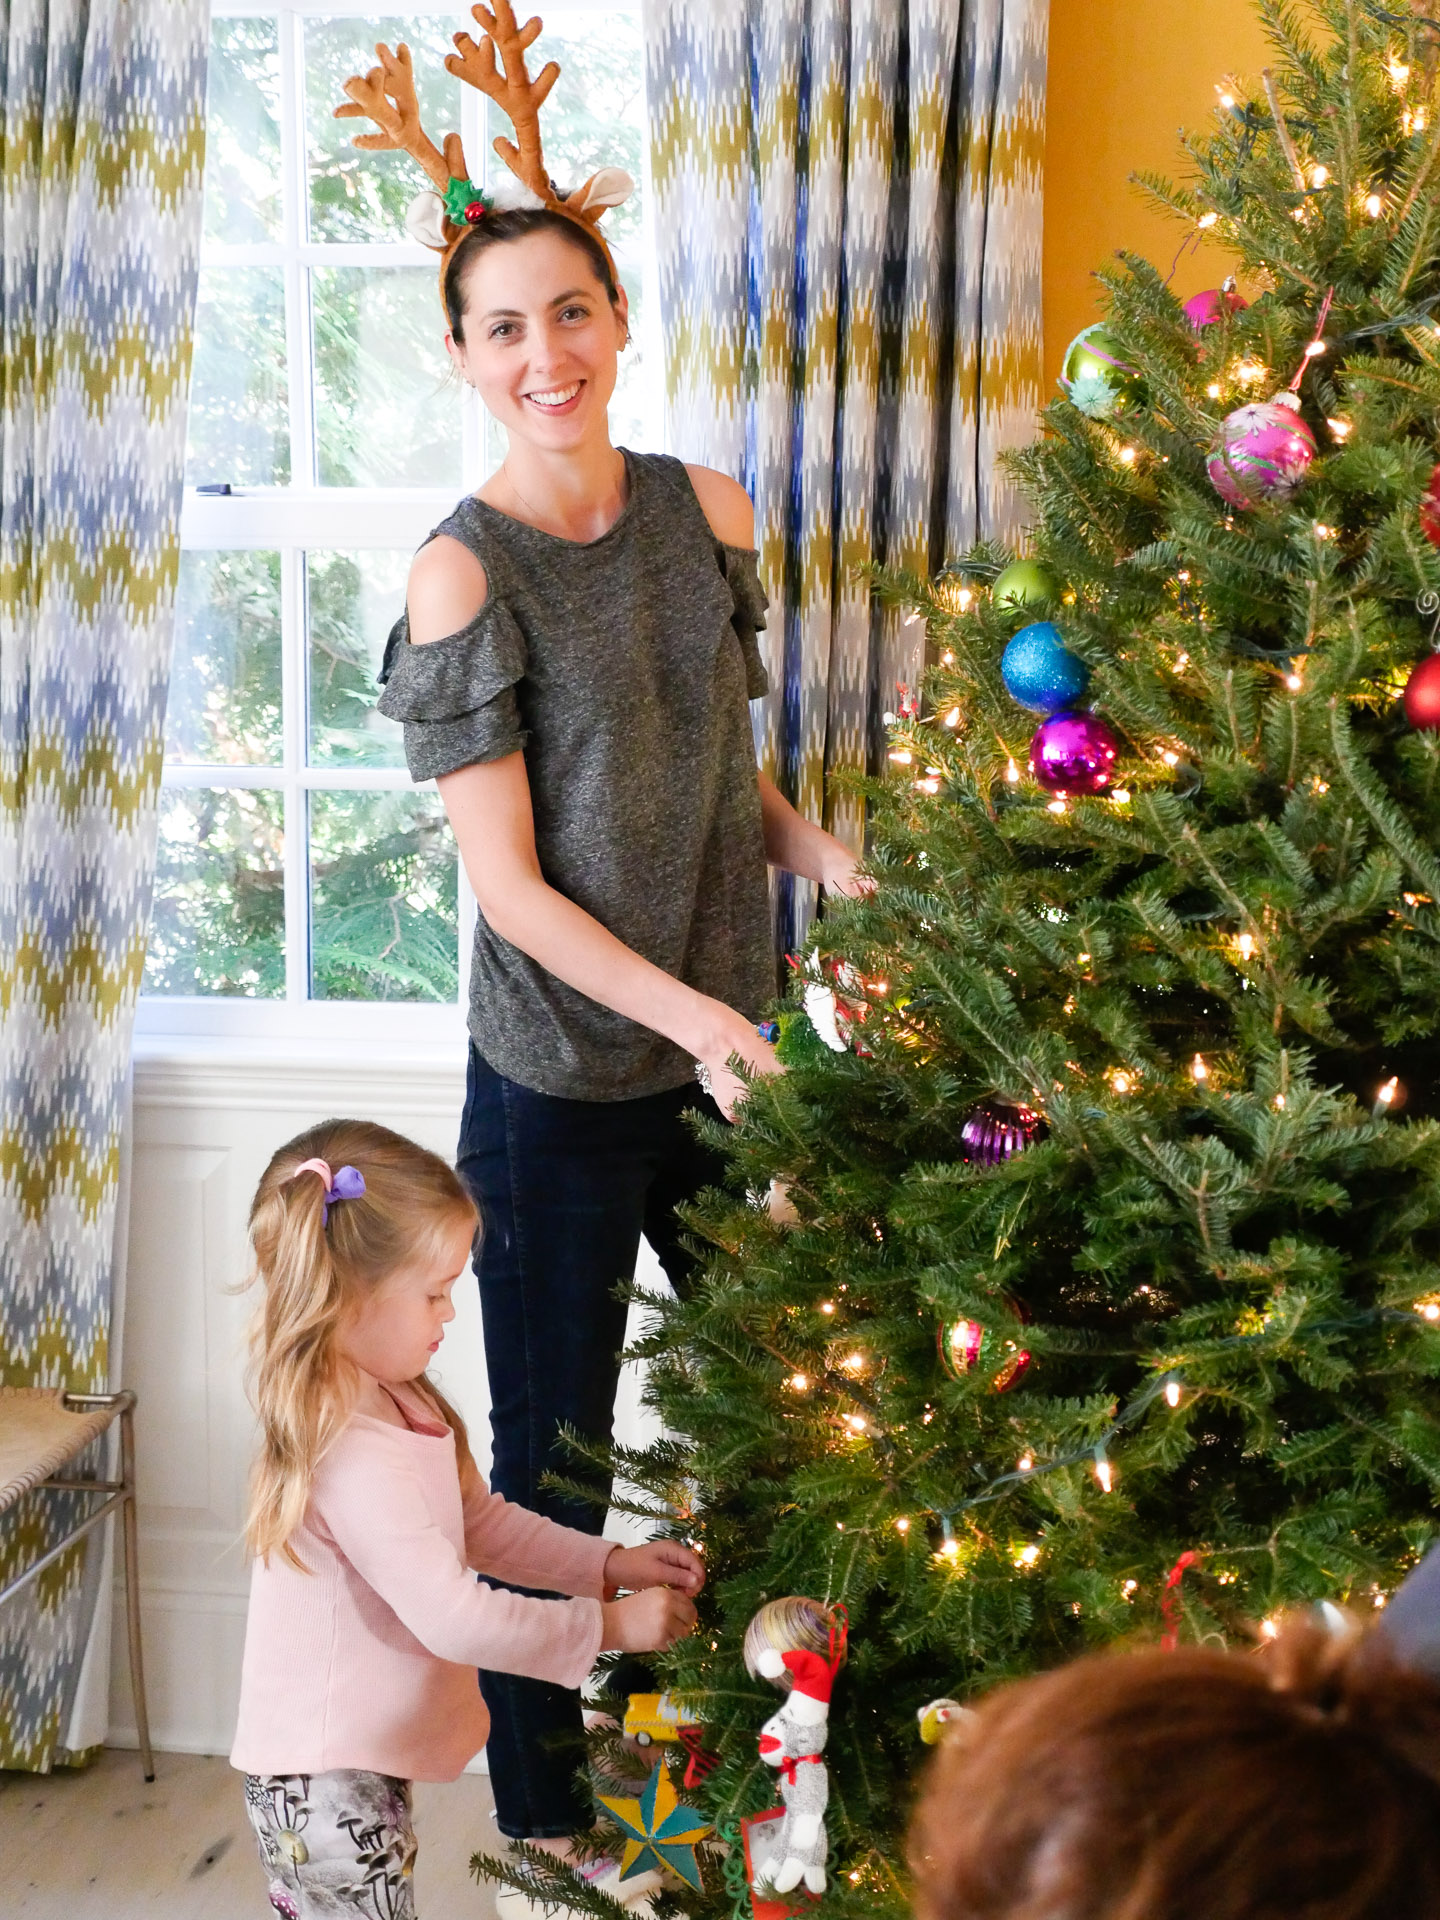 Eva Amurri wears reindeer antlers and decorates her Christmas tree with her family using a variety of ornaments collected over the years as a Christmas tradition for kids